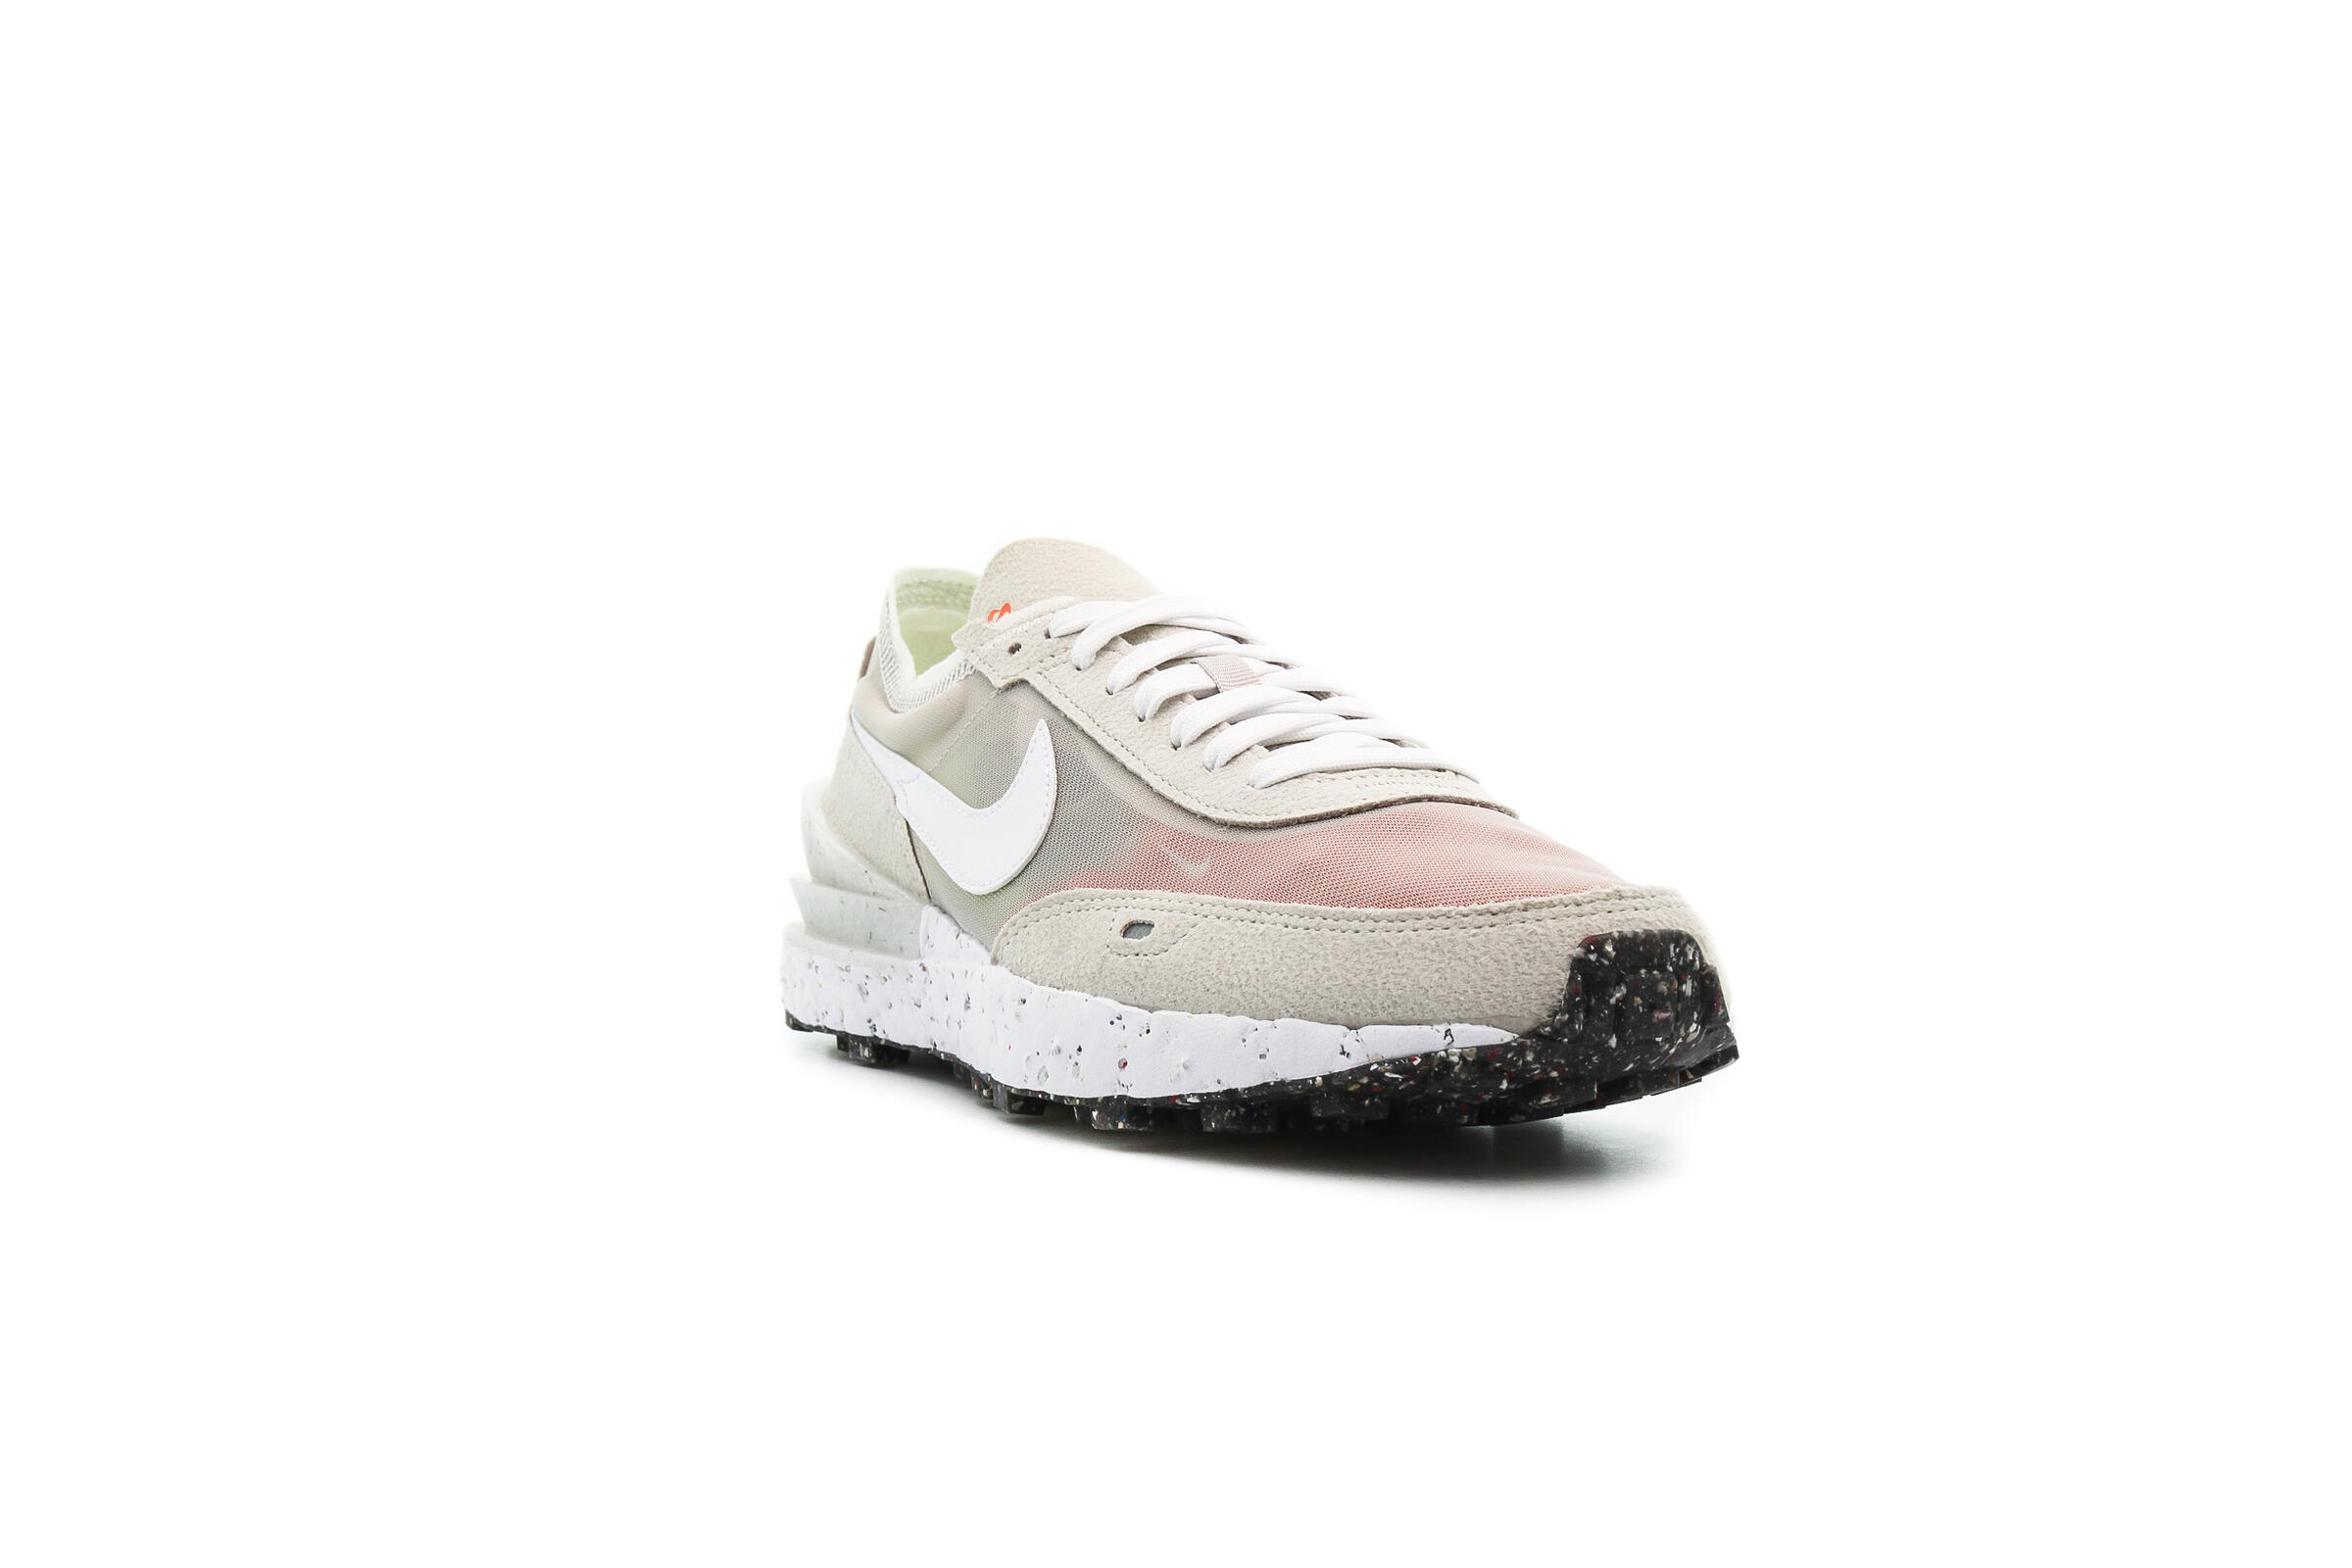 Nike WAFFLE ONE CRATER